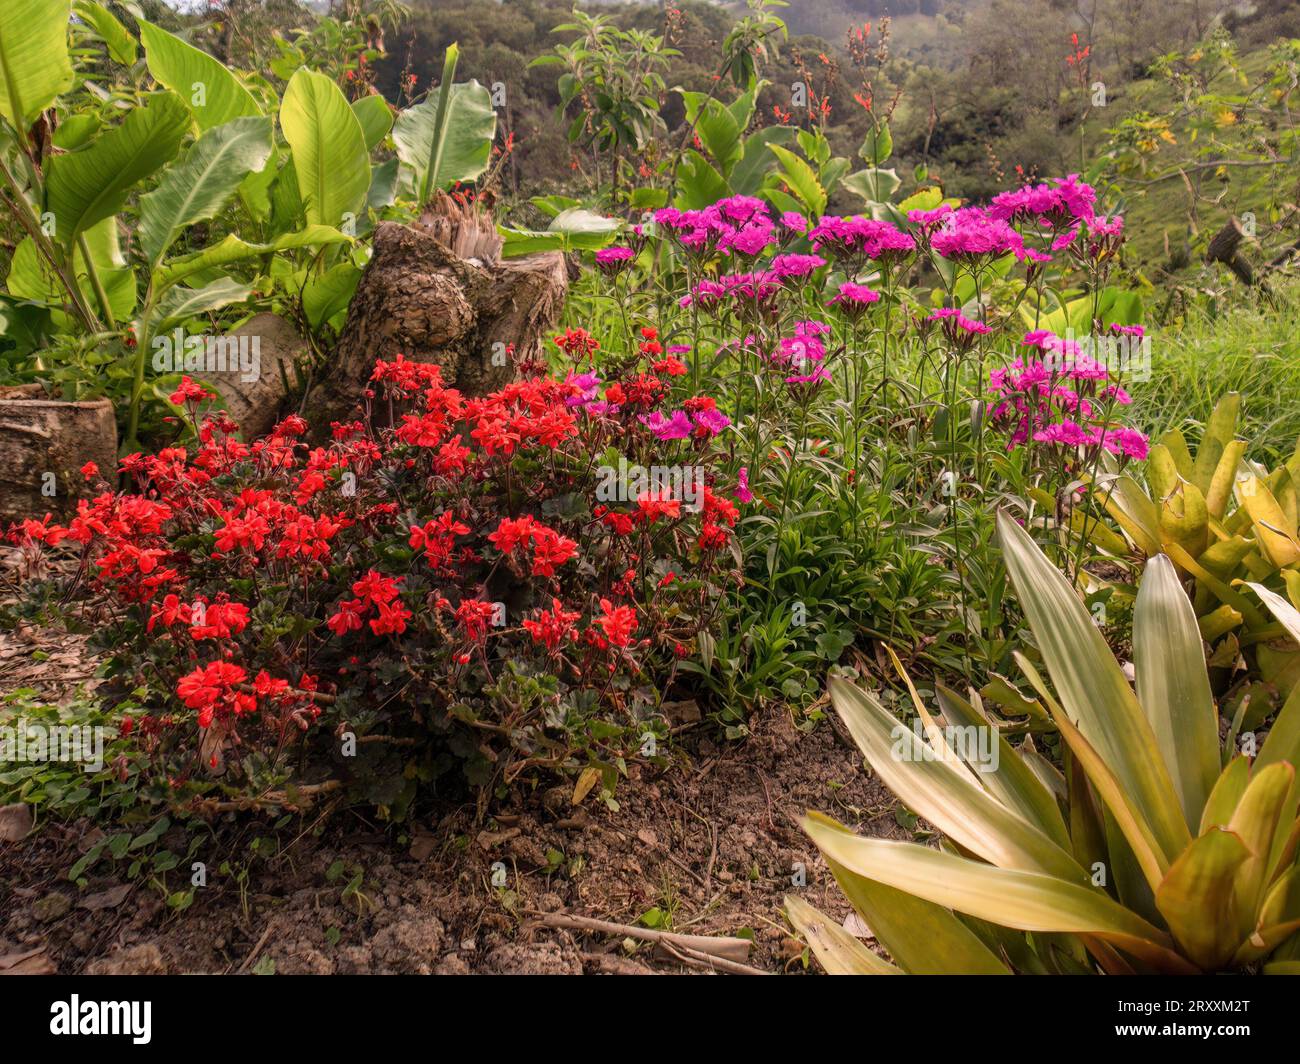 Plants of red geraniums and pink carnations in full bloom in a garden in the eastern Andean highlands near the town of Arcabuco in central Colombia. Stock Photo